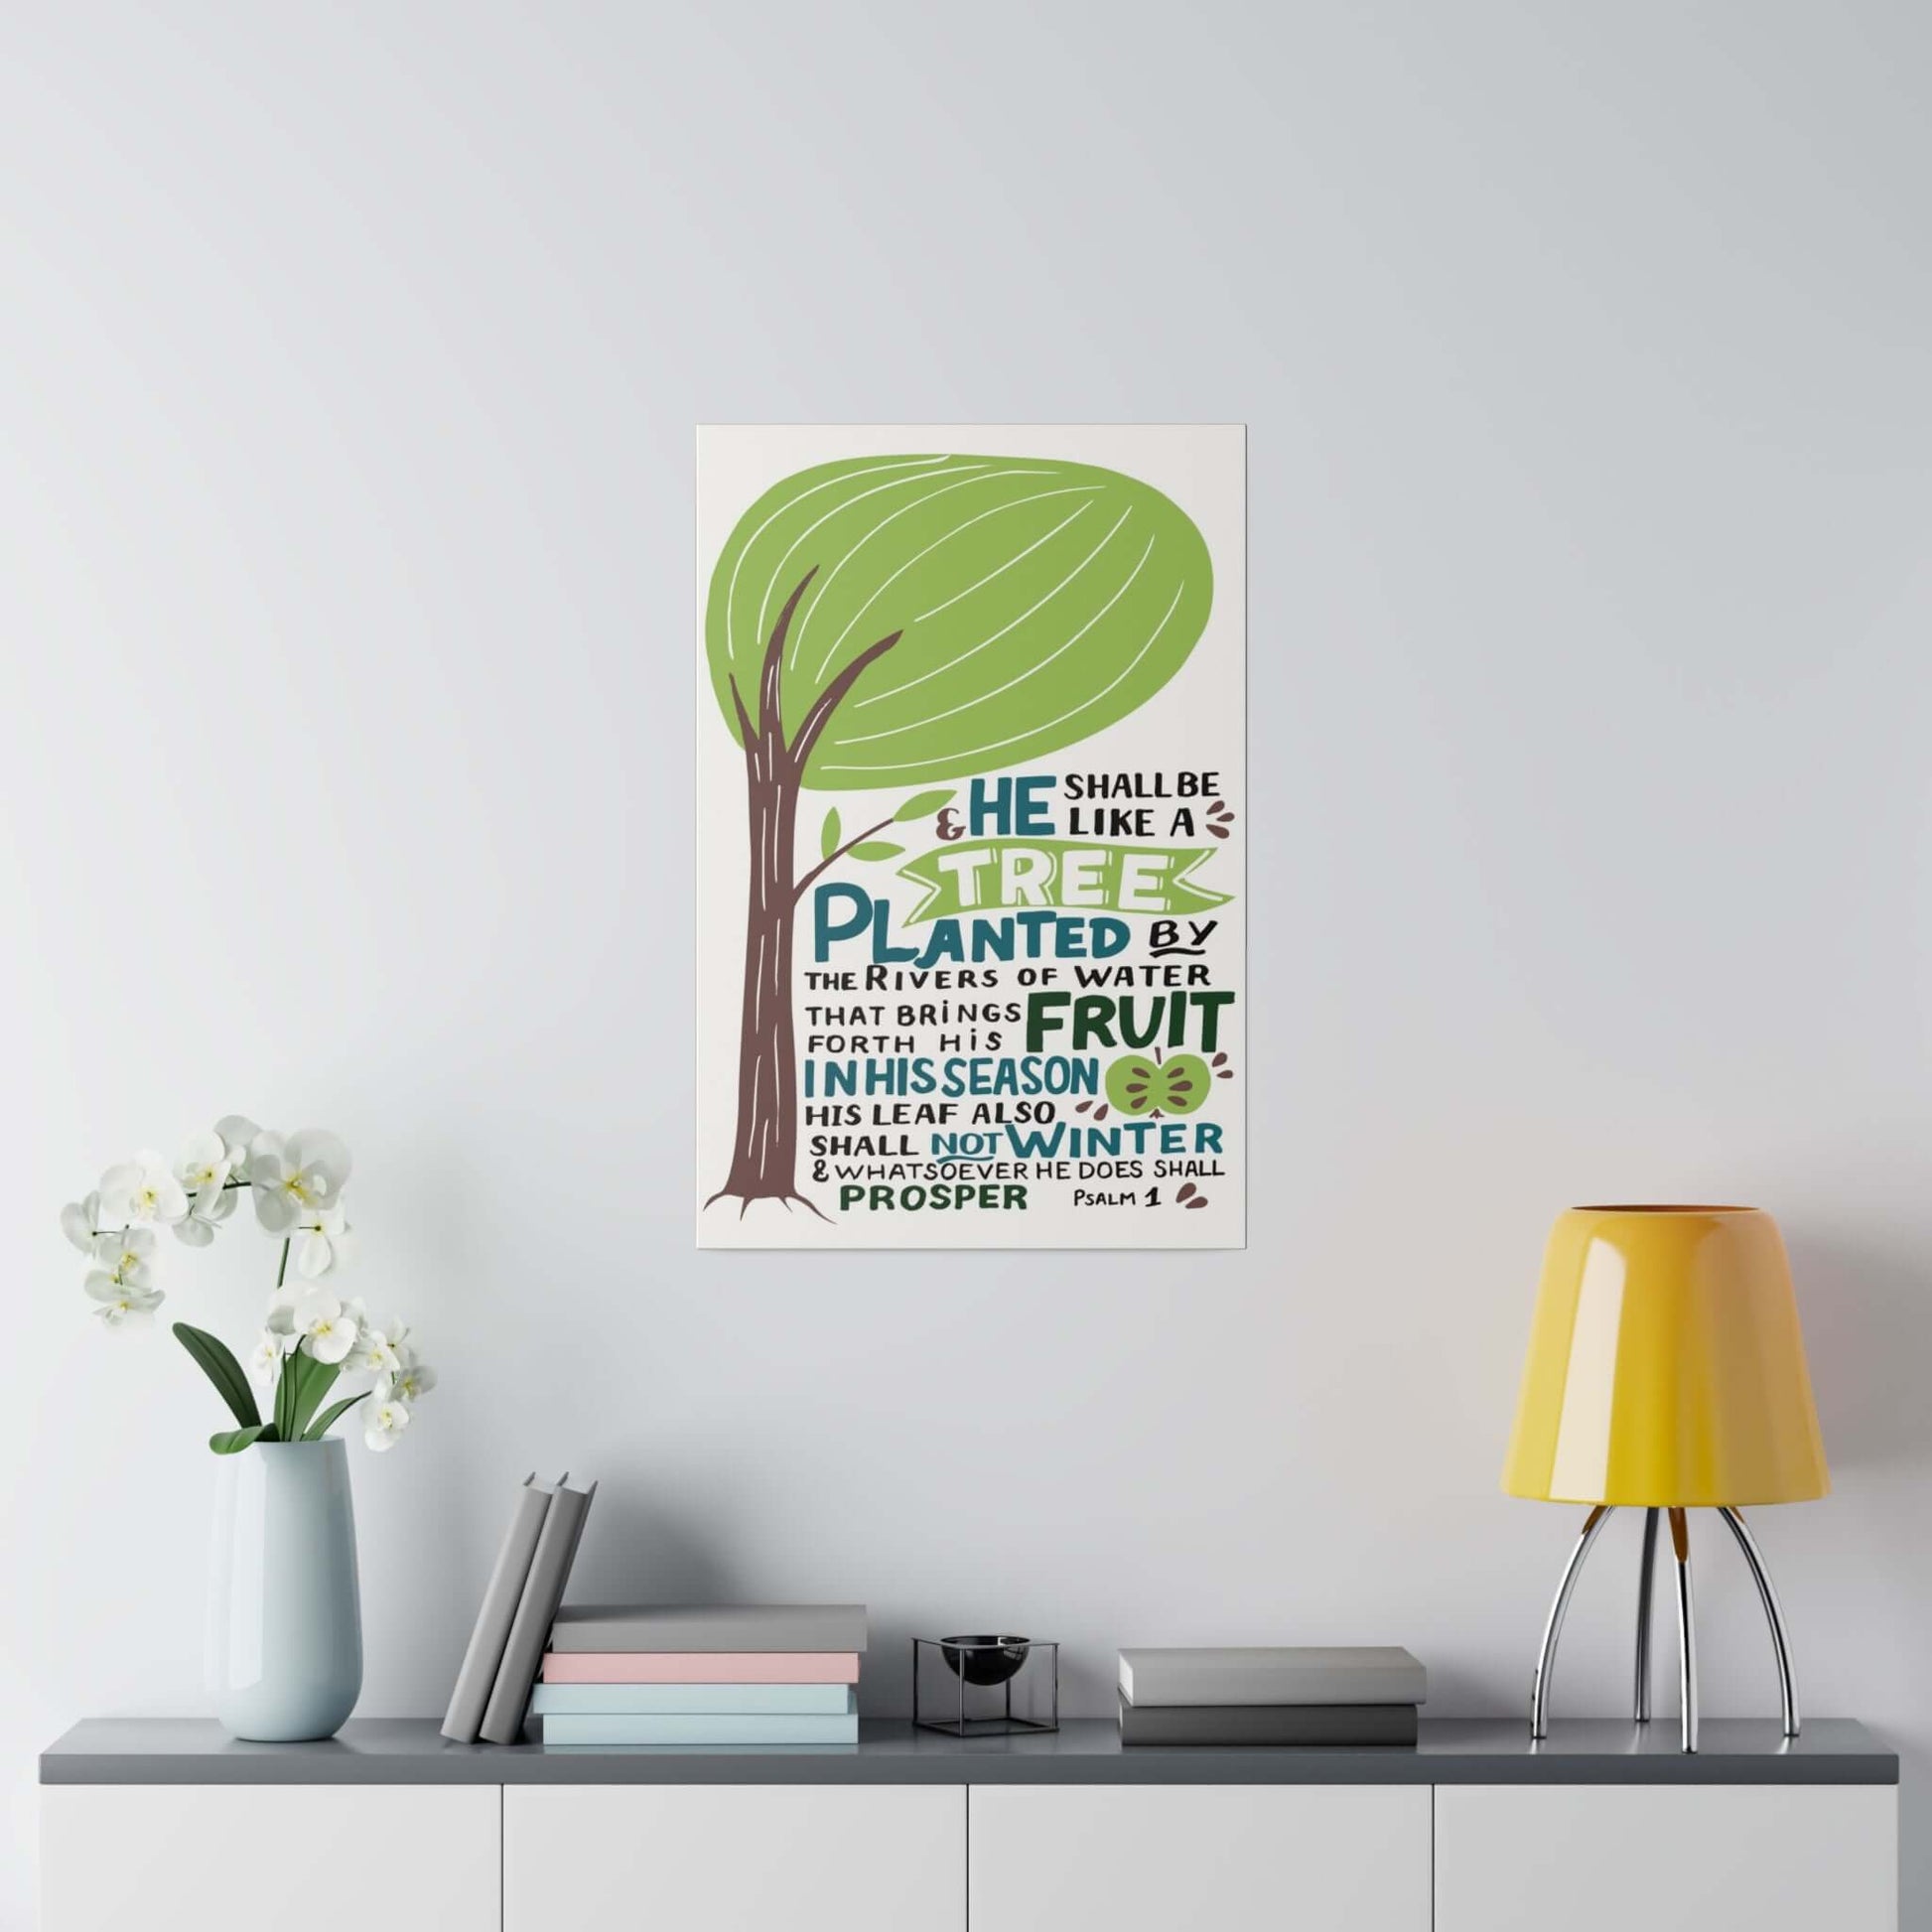 Unframed Painting Canvas with Psalm 1:3 - Durable & Eco-Friendly | Art & Wall Decor,Canvas,Decor,Eco-friendly,Hanging Hardware,Holiday Picks,Home & Living,Indoor,Matte,Seasonal Picks,Sustainable,Wall,Wood